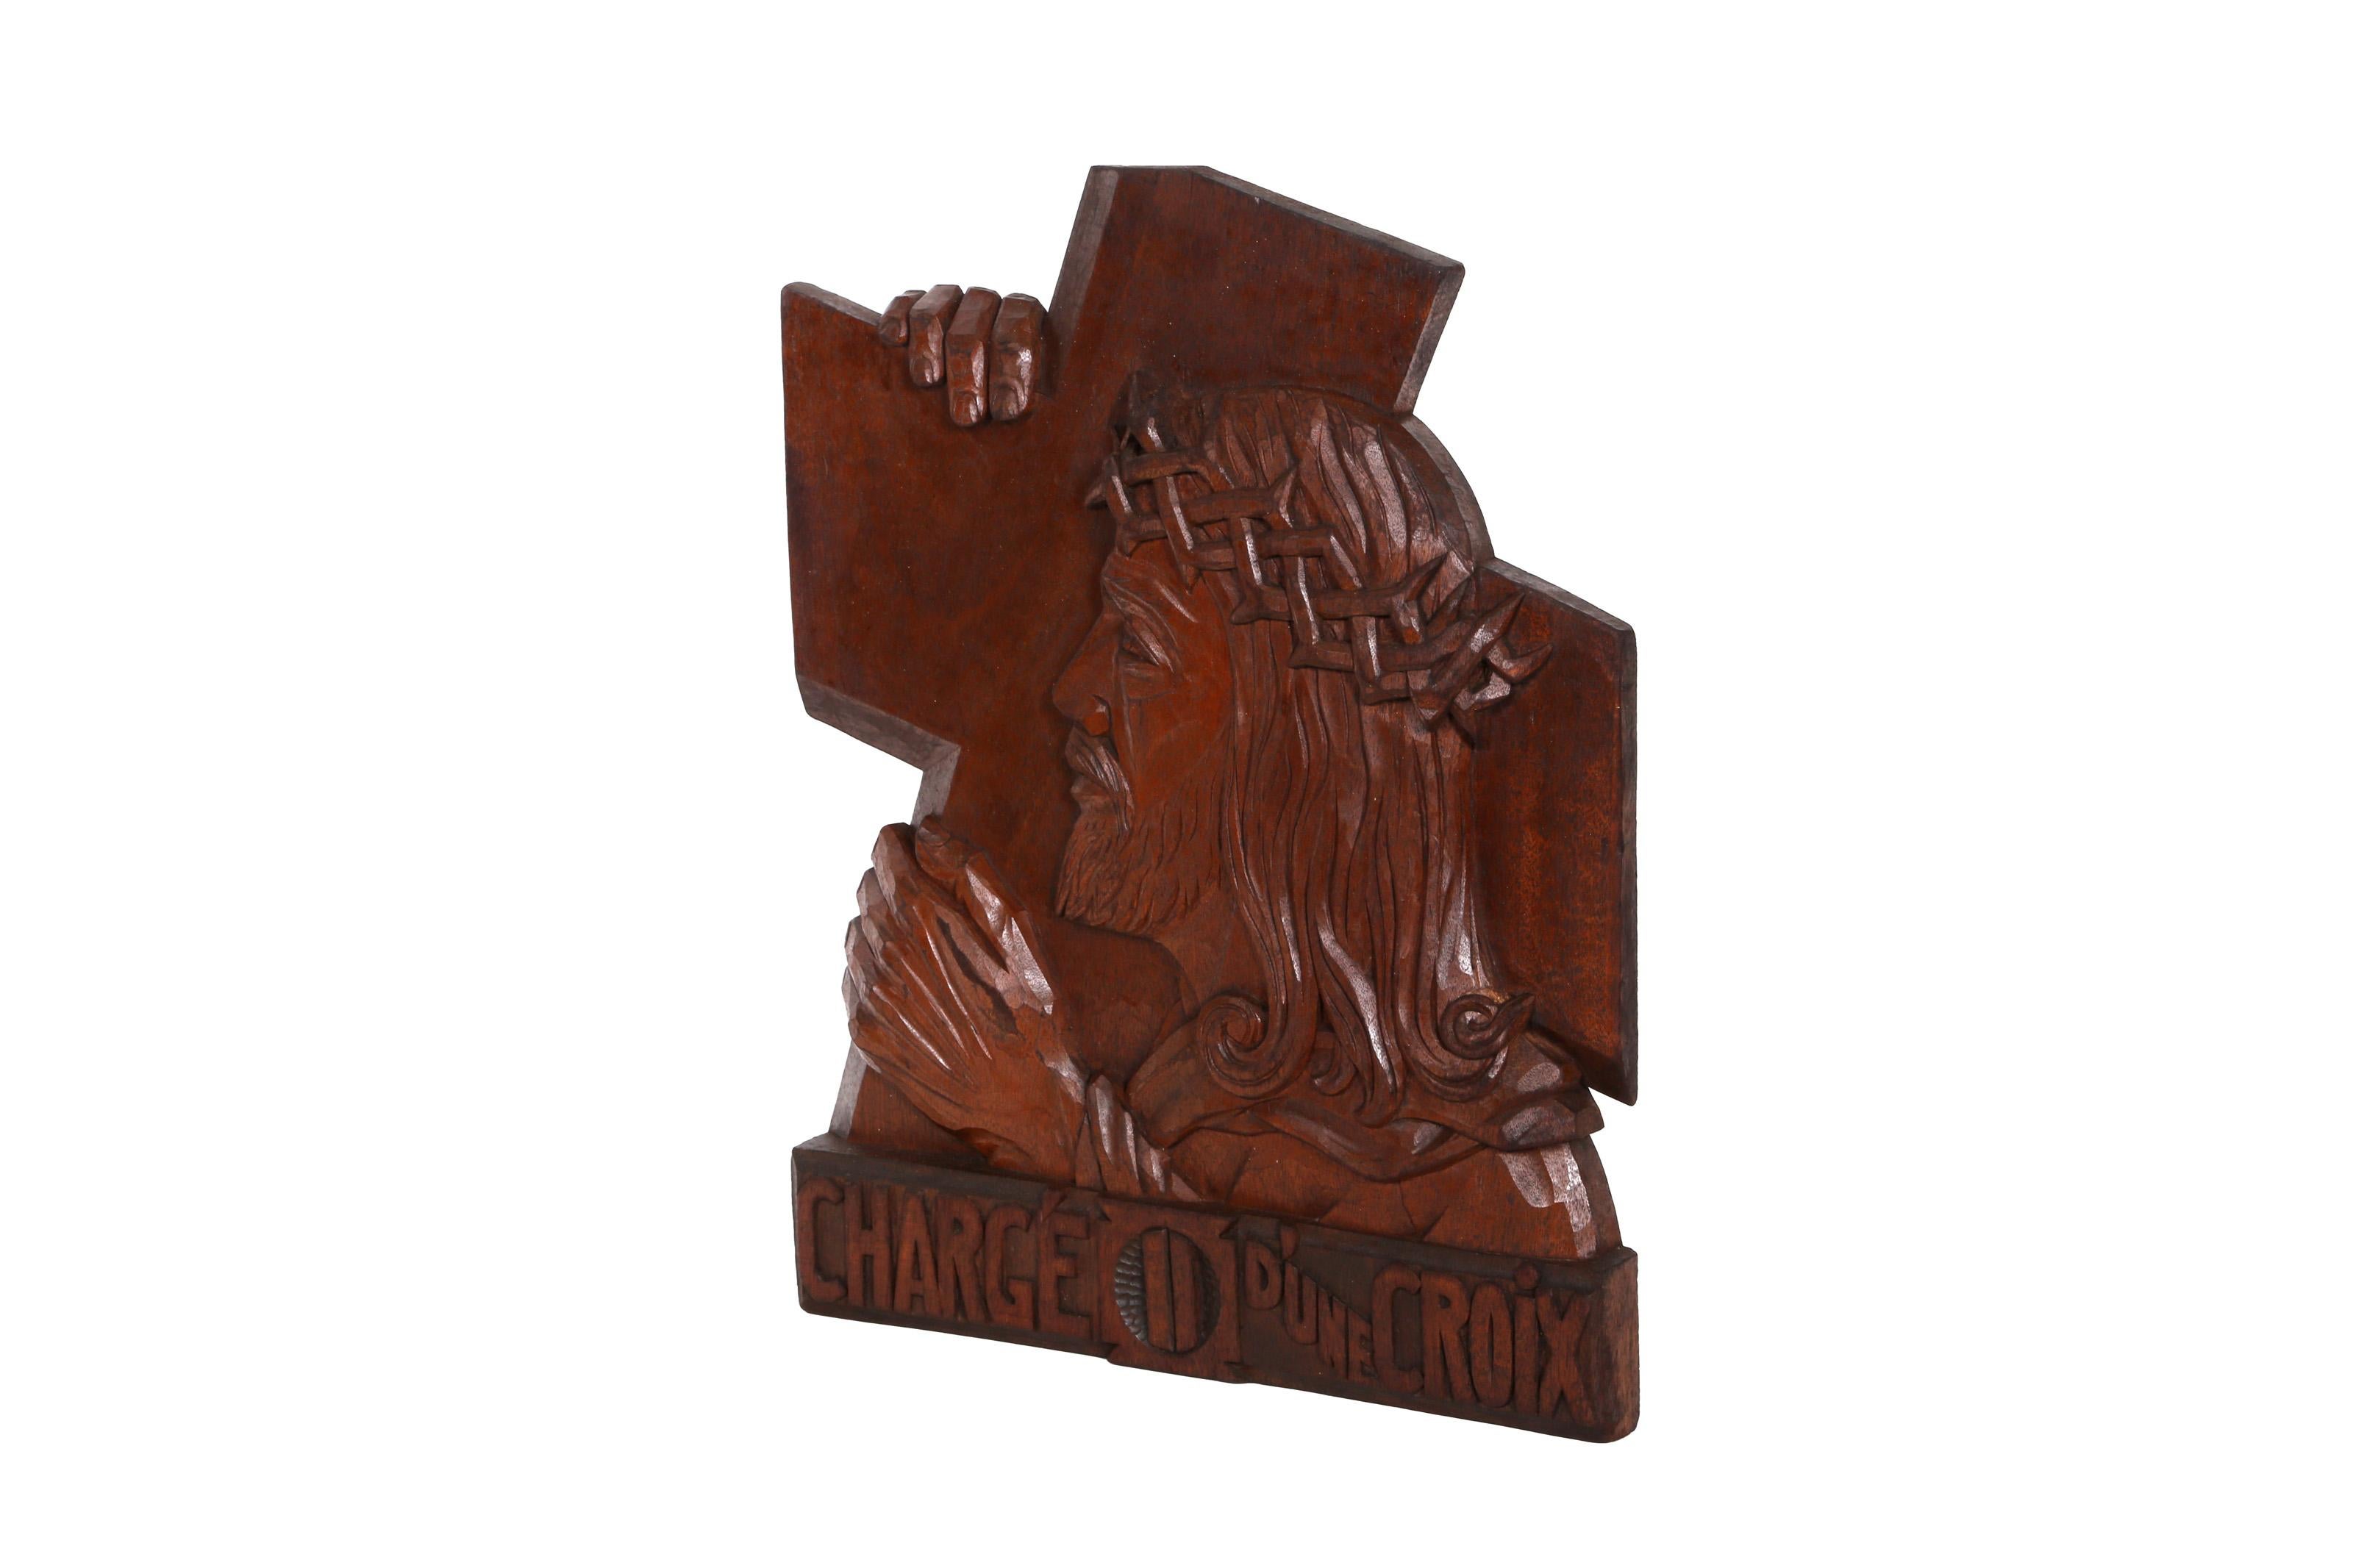 Charge D'une Croix, Hand Carved Wooden Sculpture by Constantin Antonovici For Sale 3